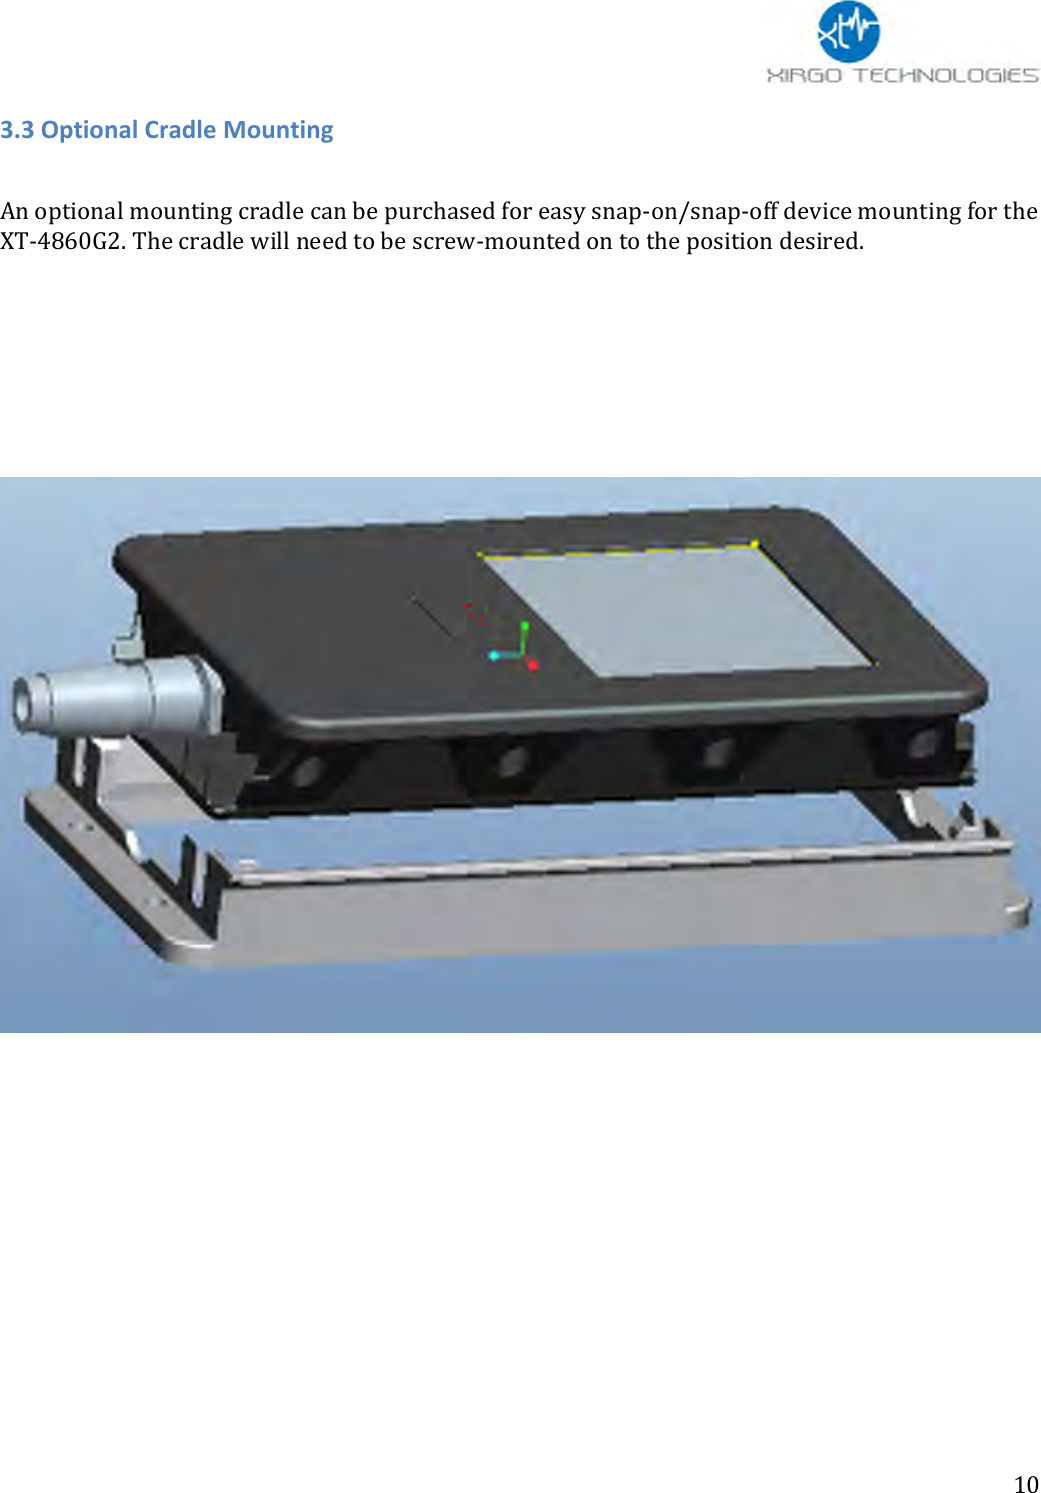                 10 3.3 Optional Cradle Mounting  An optional mounting cradle can be purchased for easy snap-on/snap-off device mounting for the XT-4860G2. The cradle will need to be screw-mounted on to the position desired.              